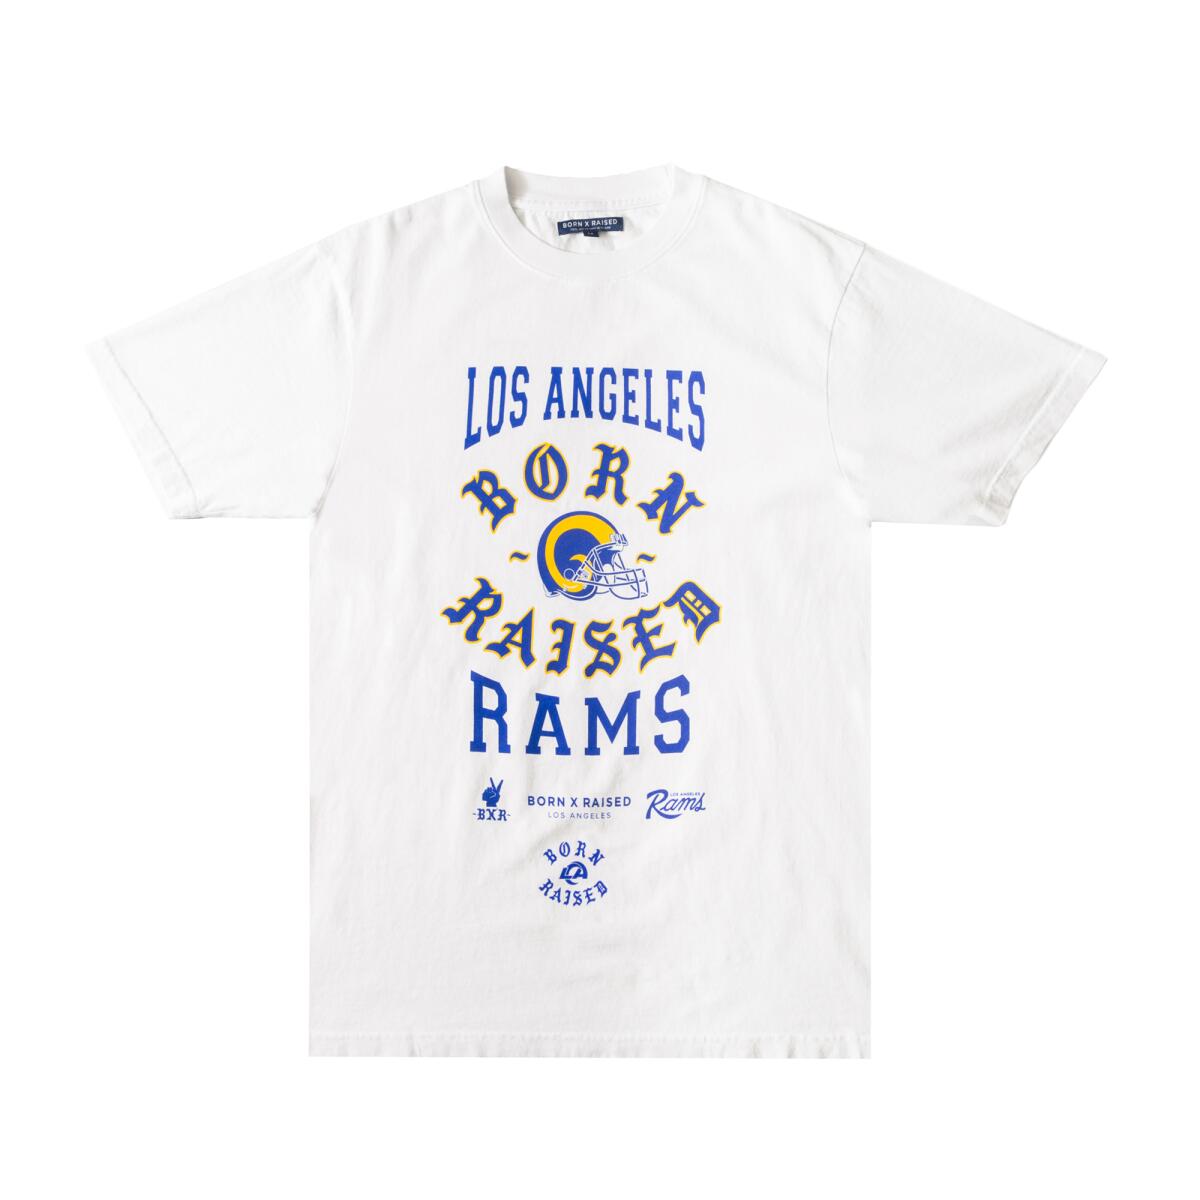 Born X Raised L.A. Rams streetwear sells out in minutes - Los Angeles Times